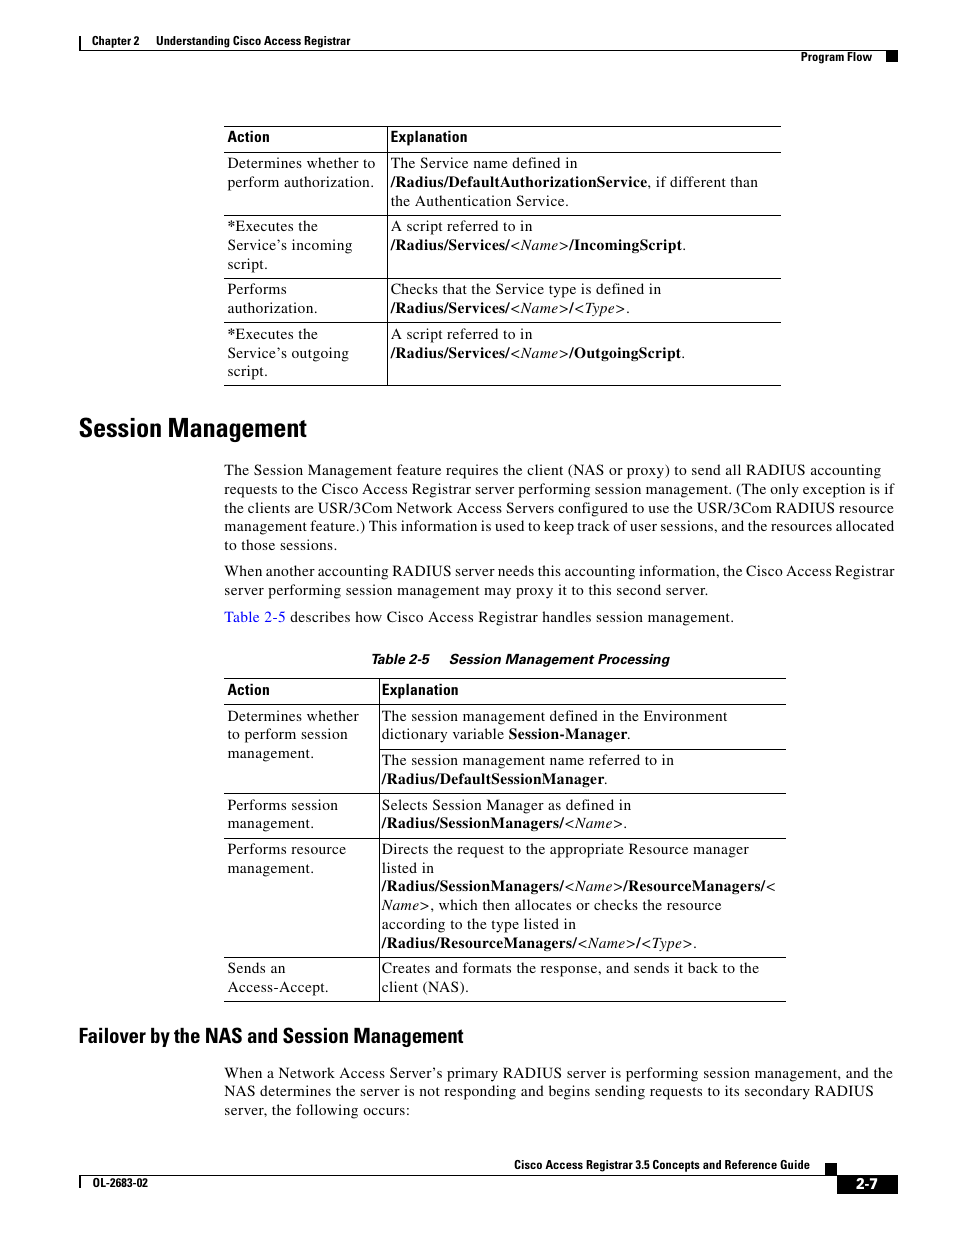 Session management, Failover by the nas and session management | Cisco Cisco Access Registrar 3.5 User Manual | Page 25 / 80